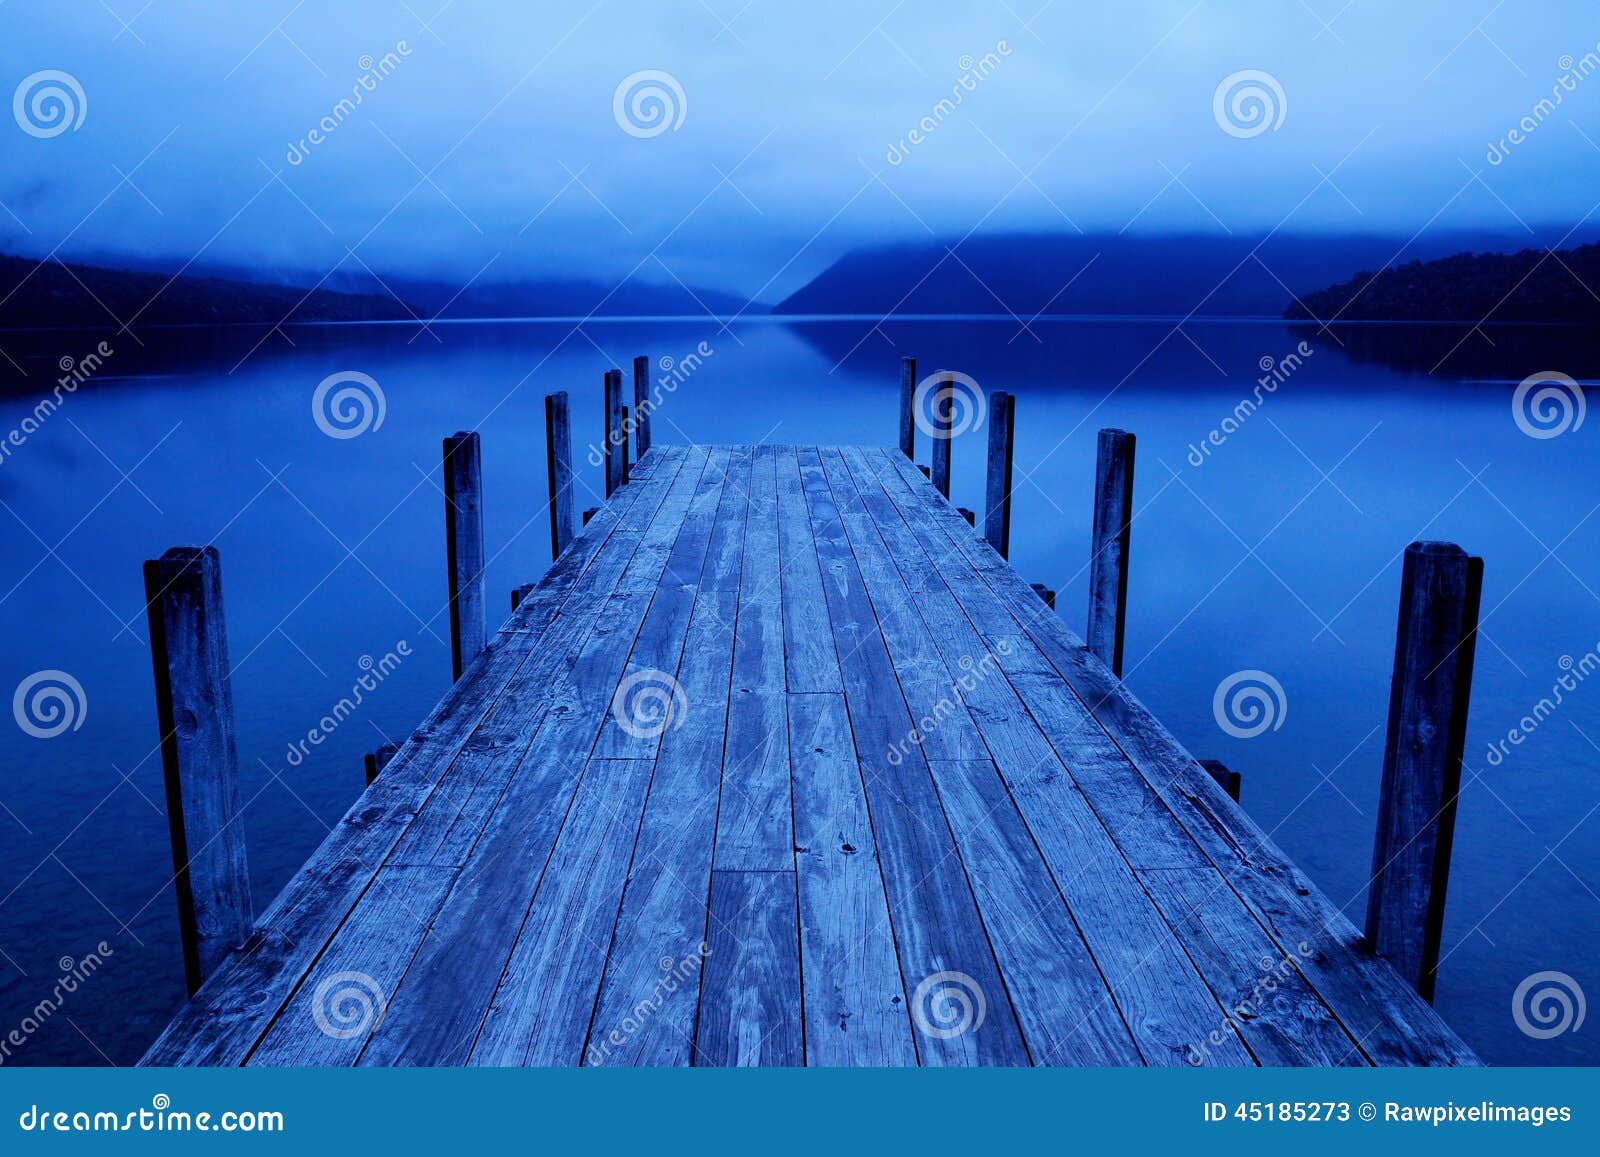 tranquil peaceful lake with blue jetty